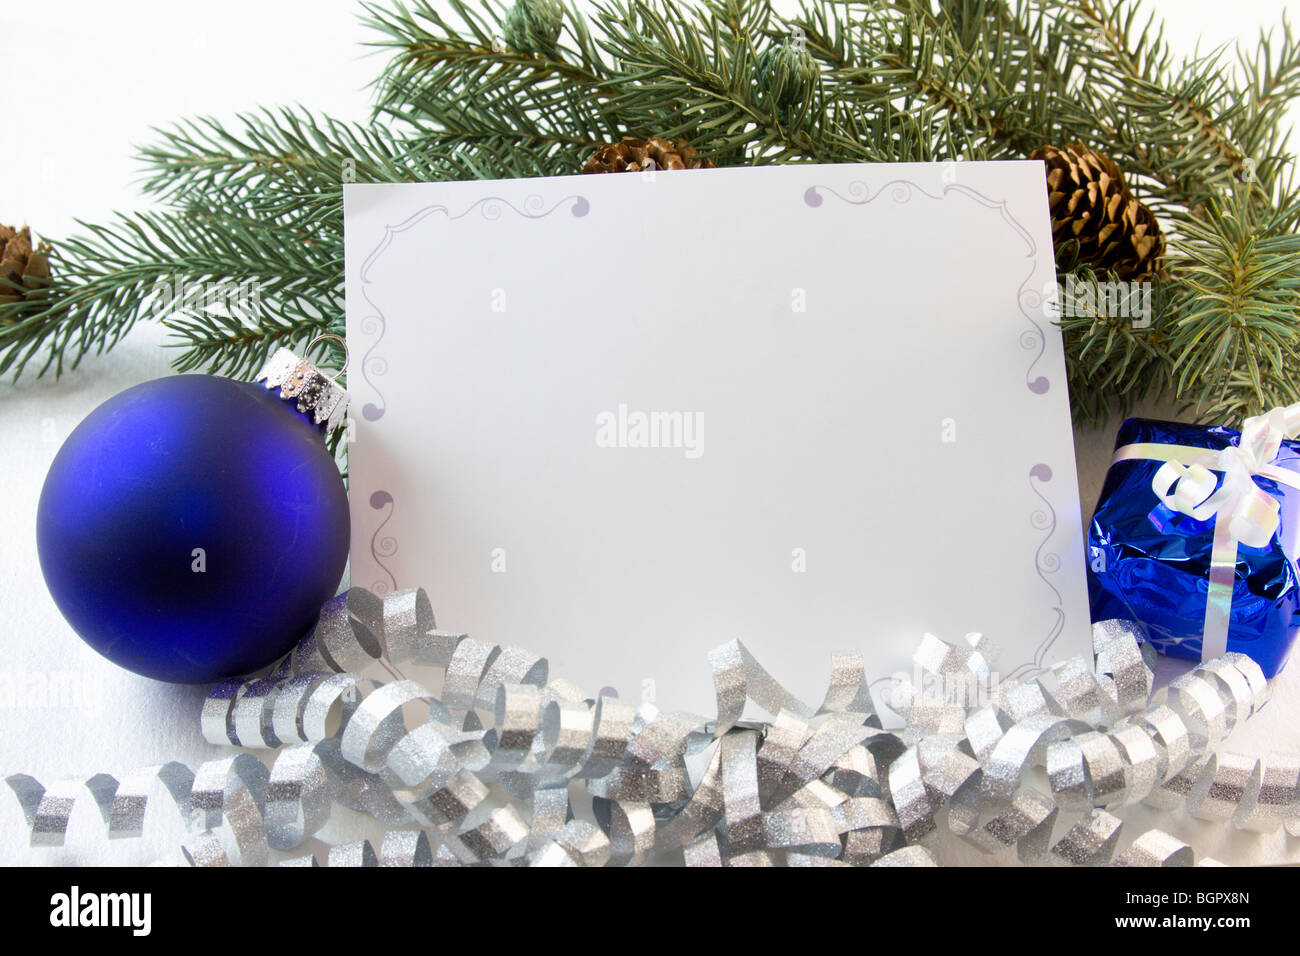 blank Christmas card with blue ornaments, fir branch and copyspace Stock Photo